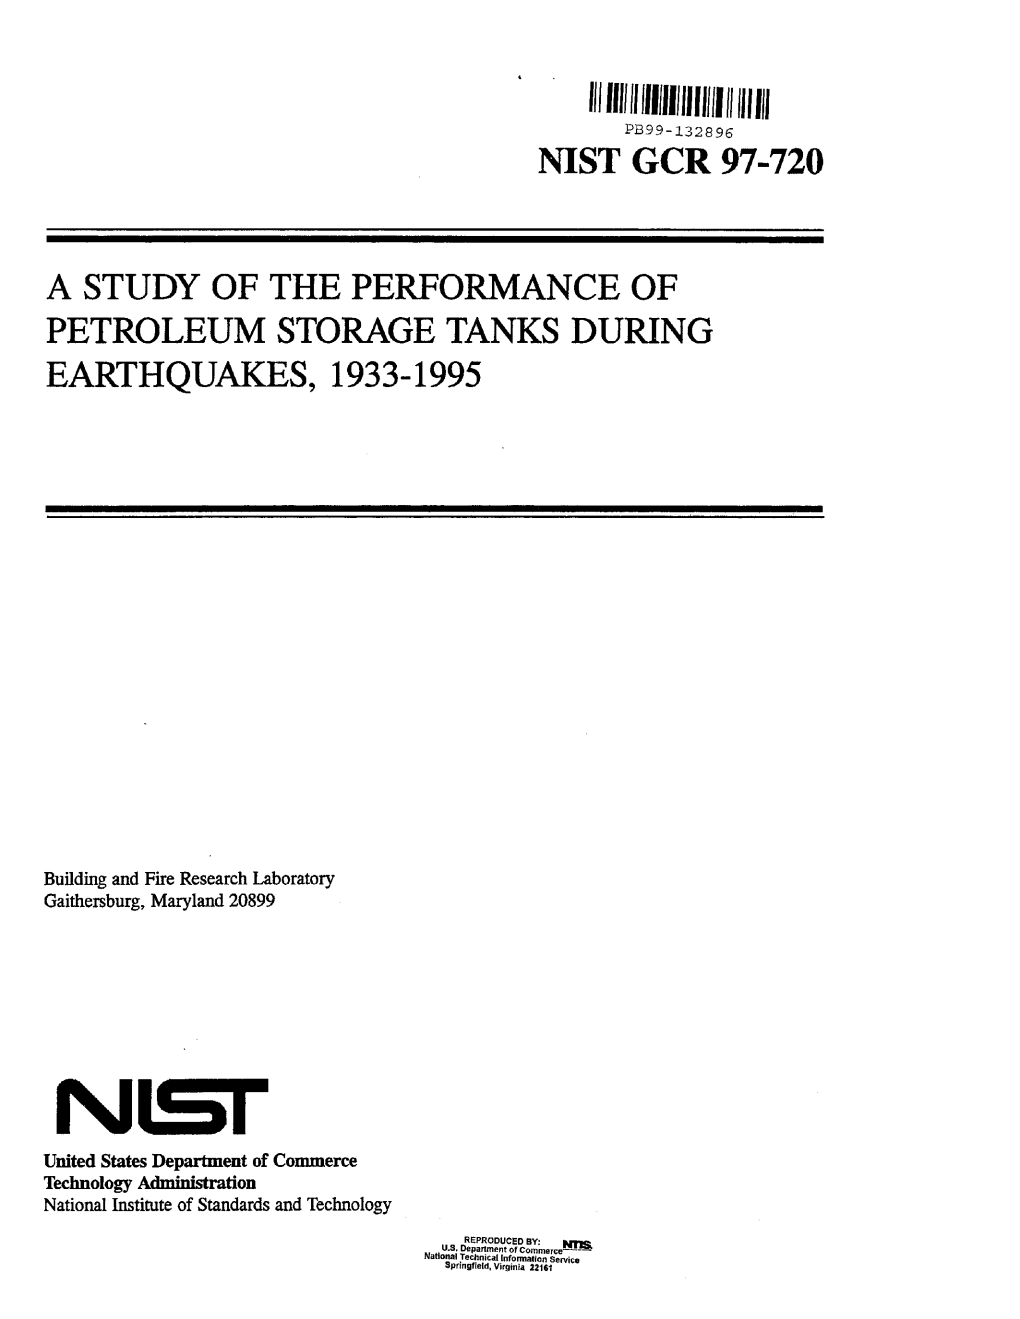 Nist Gcr 97-720 a Study of the Performance of Petroleum